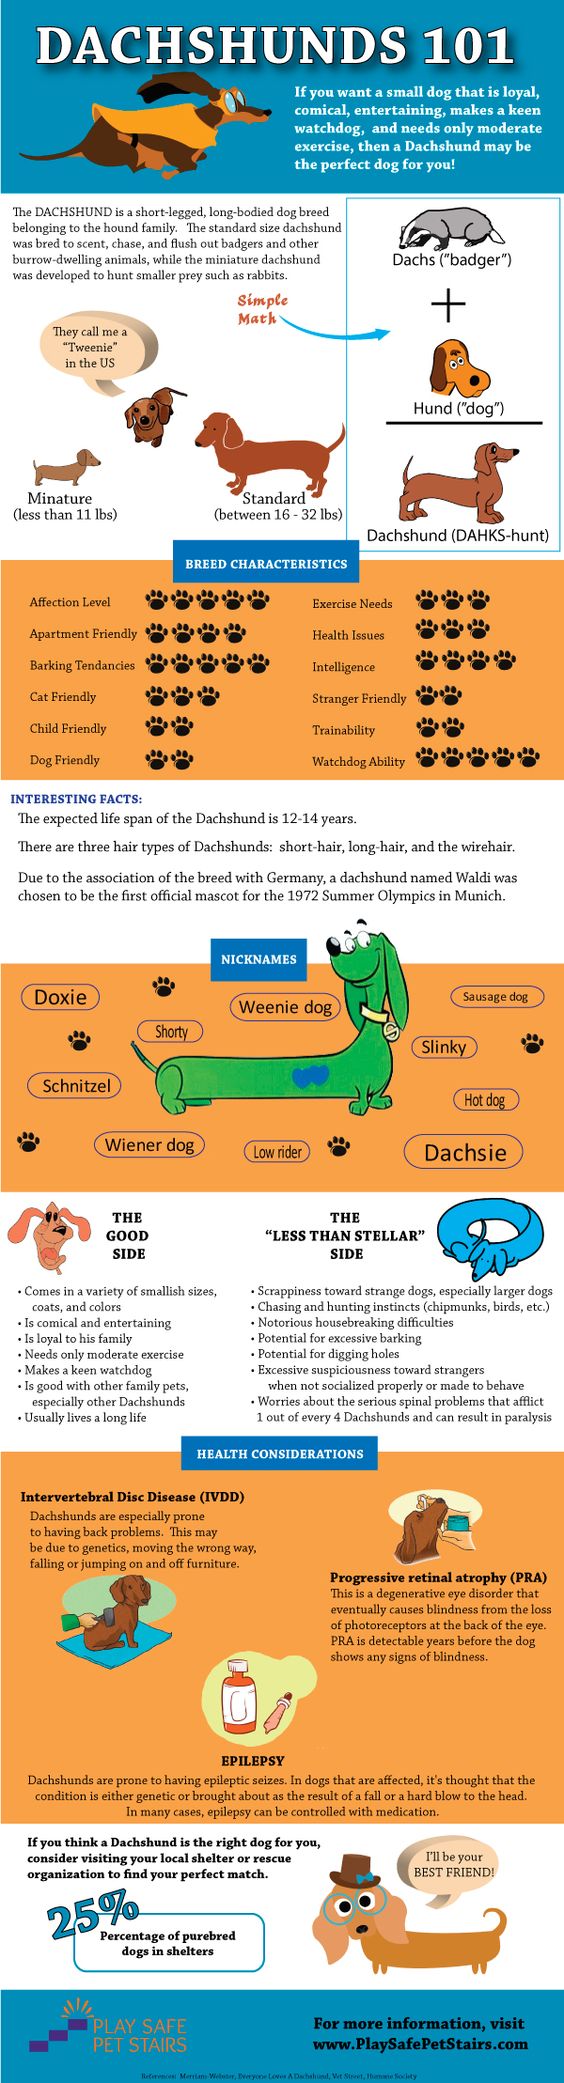 Think a Dachshund is the perfect dog for you? This Dachshunds 101 infographic can help you decide! And, if you do decide a #Dachshund is the perfect pet for your family, make sure to get them their very own #dogstairs so they can reach you on the couch or bed (they call them 